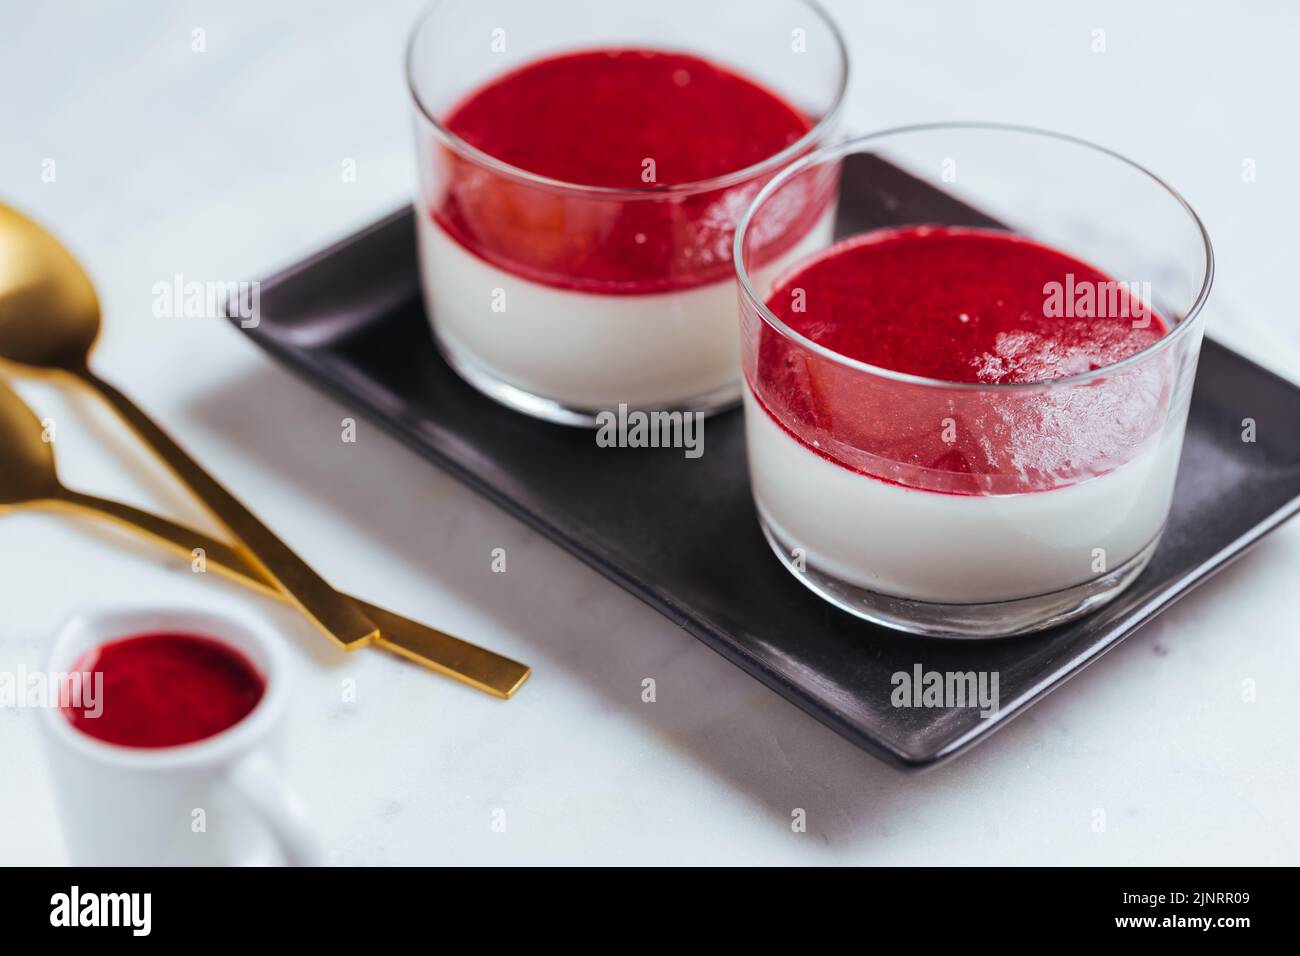 Panna cotta dessert with sauce from berries. Cherries, raspberries and blueberry as decoration. Served in two glasses on bright white background. Trad Stock Photo